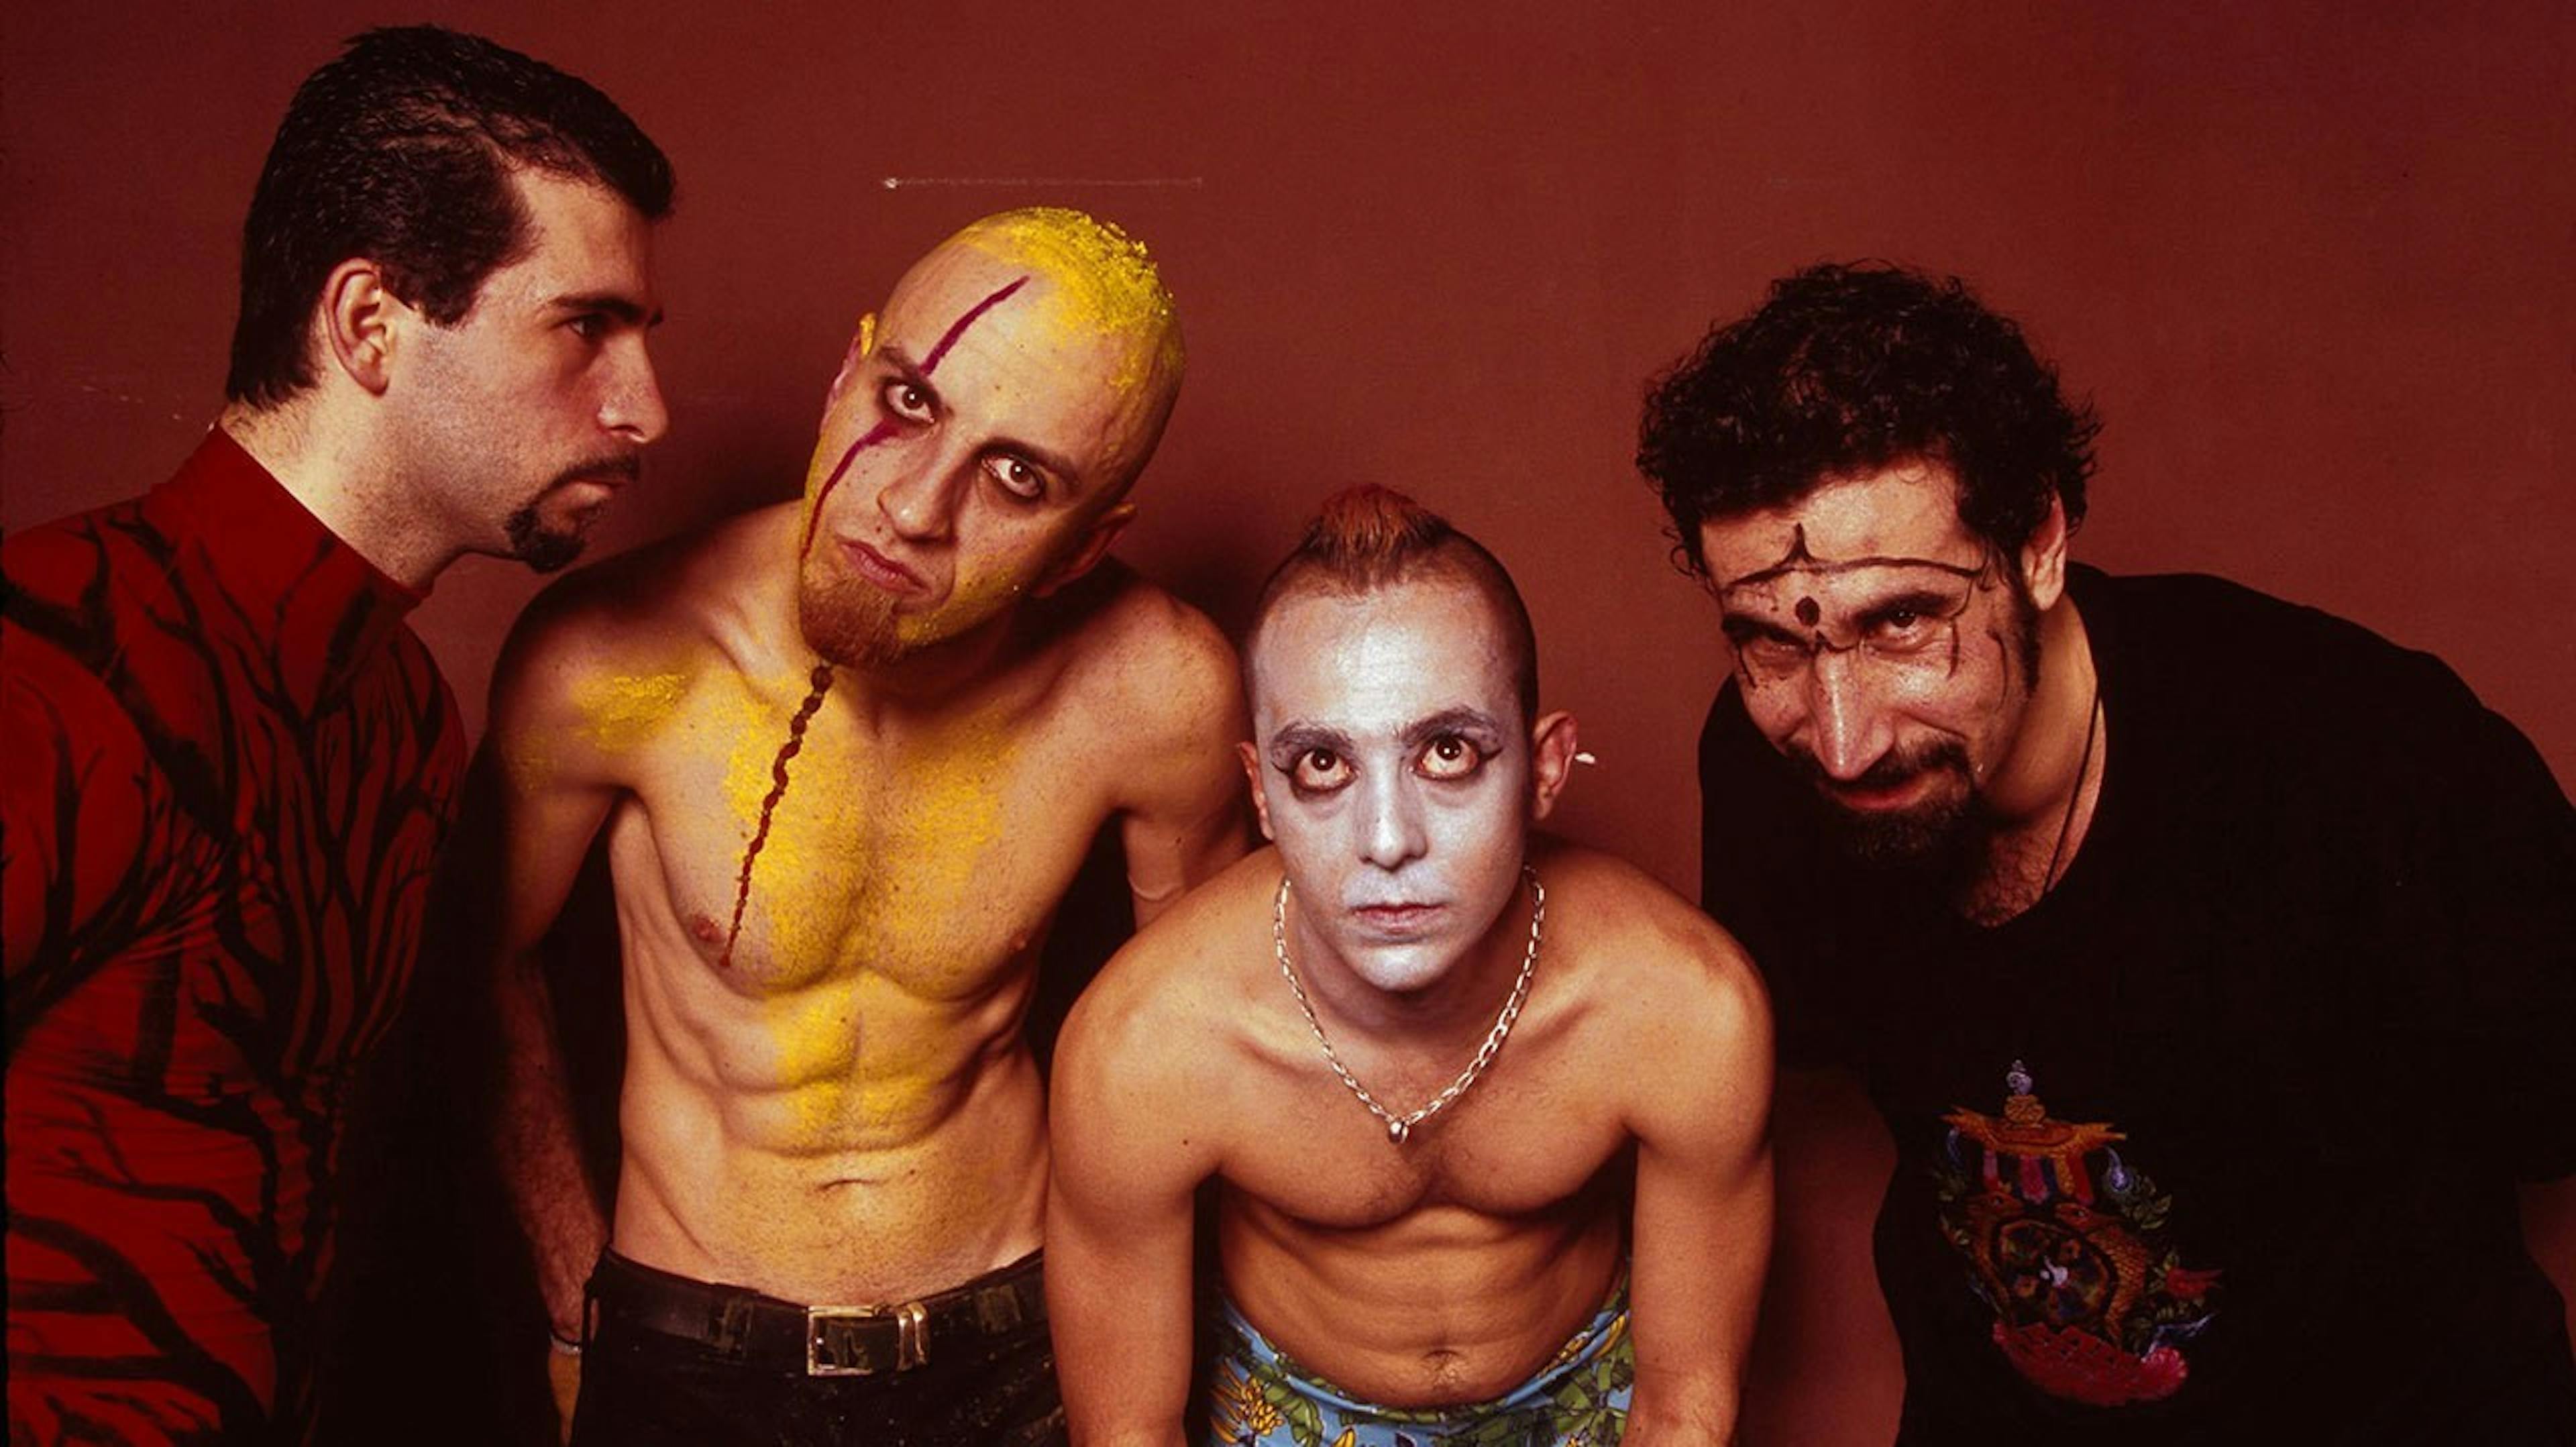 System Of A Down: Every album ranked from worst to best